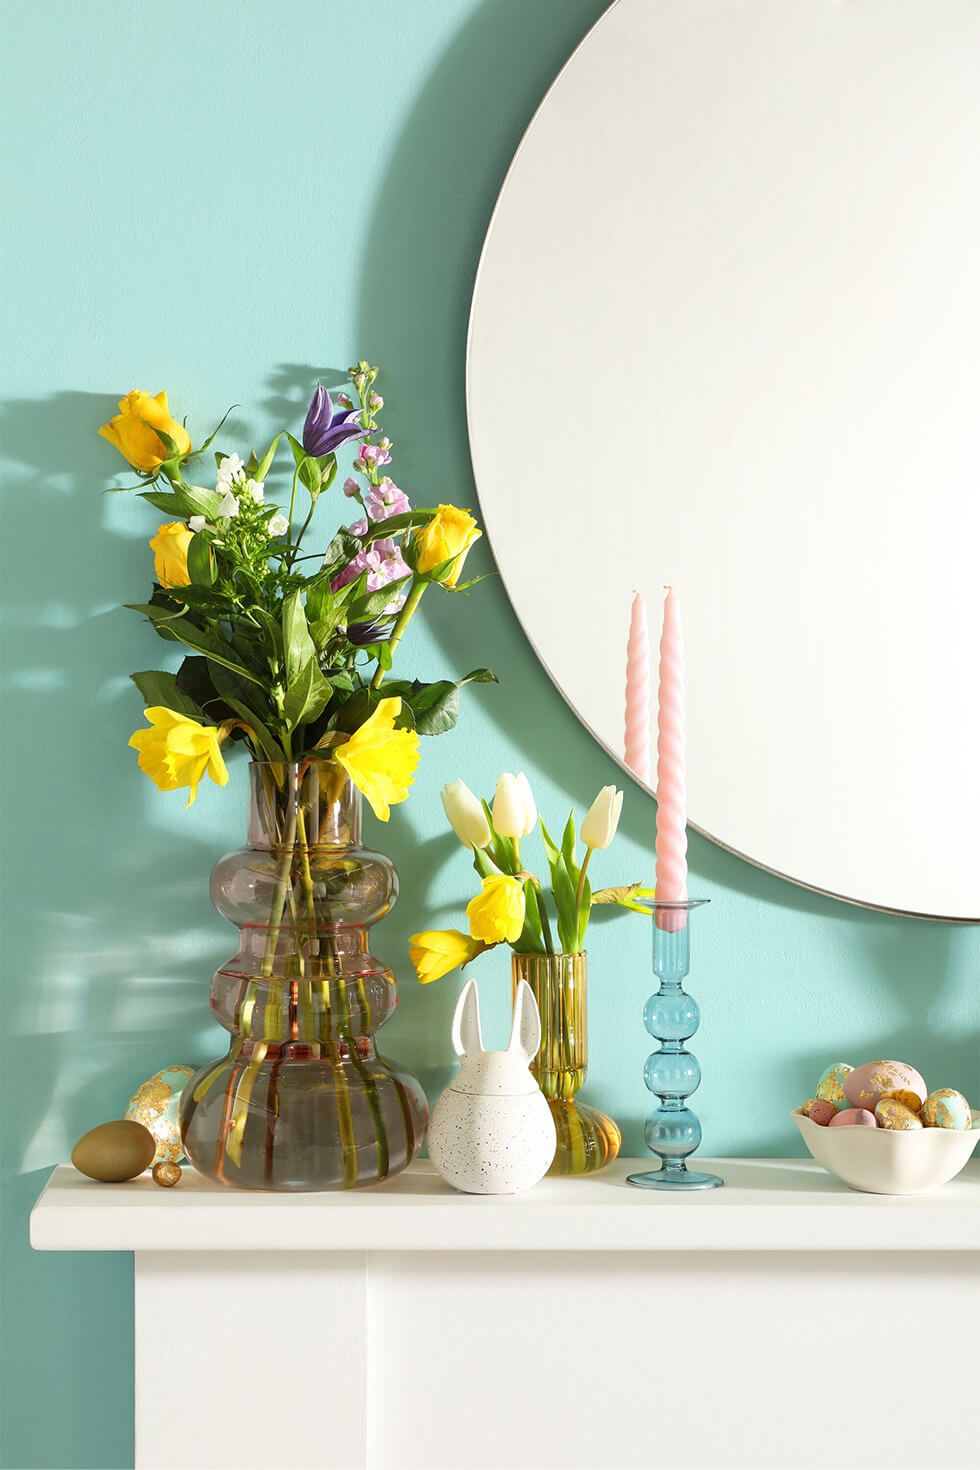 Easter mantelpiece with flowers, eggs and bunny motifs